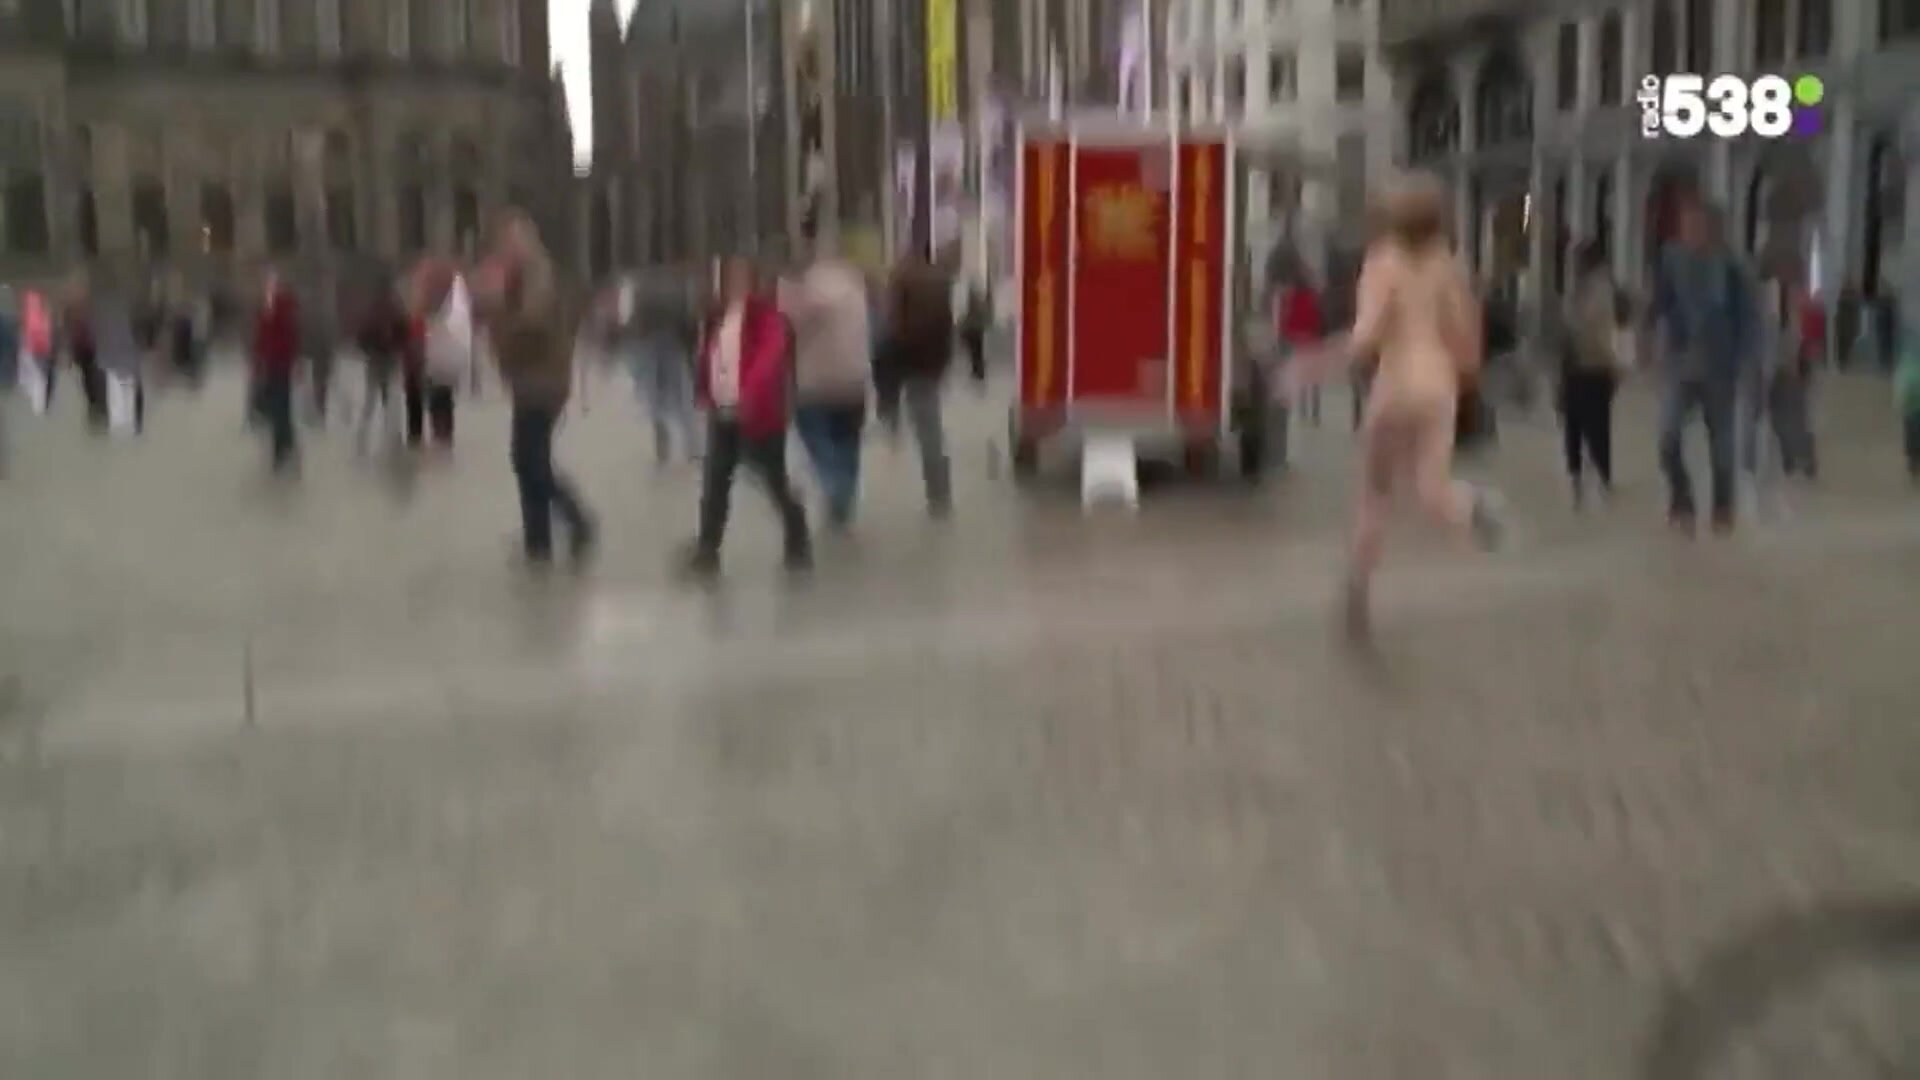 Streaking for TV show